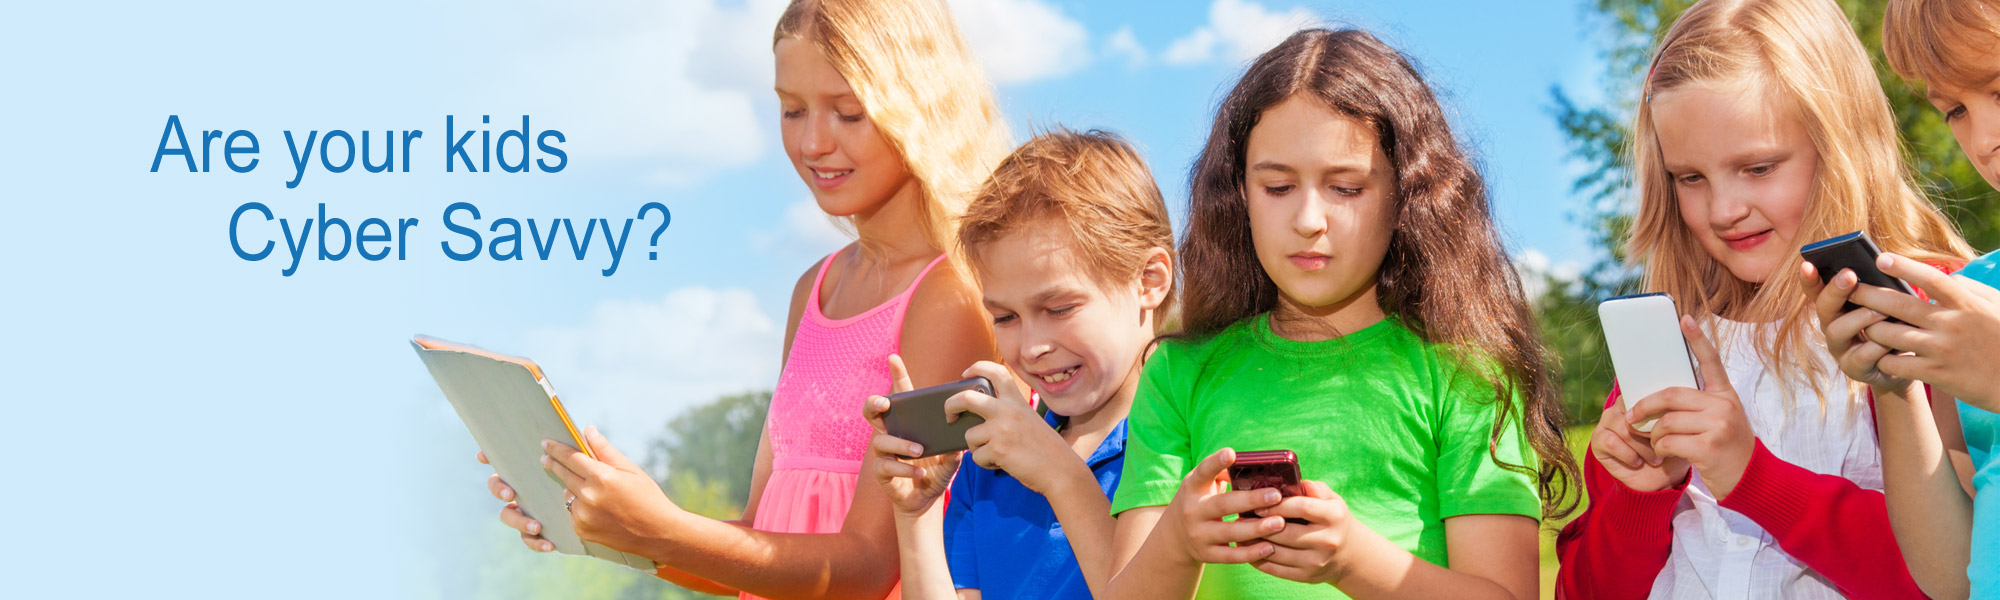 Are your kids Cyber Savvy? Kids with cell phones